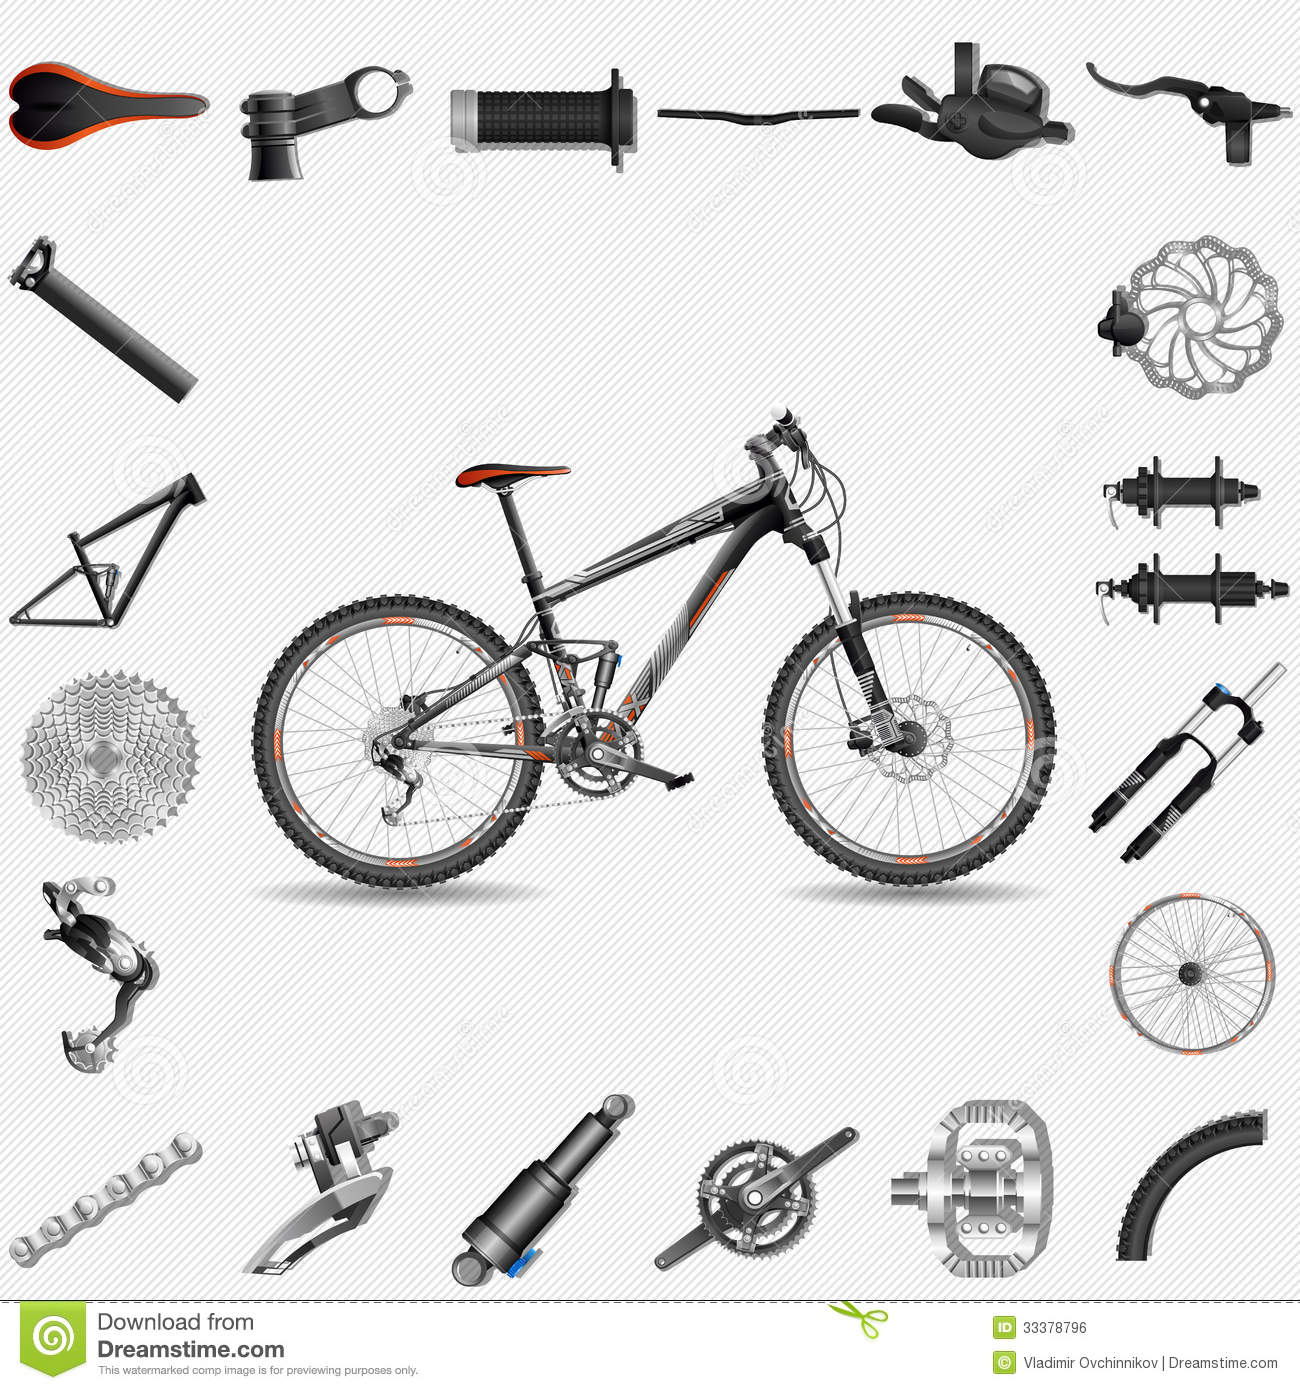 bicycle parts online shopping